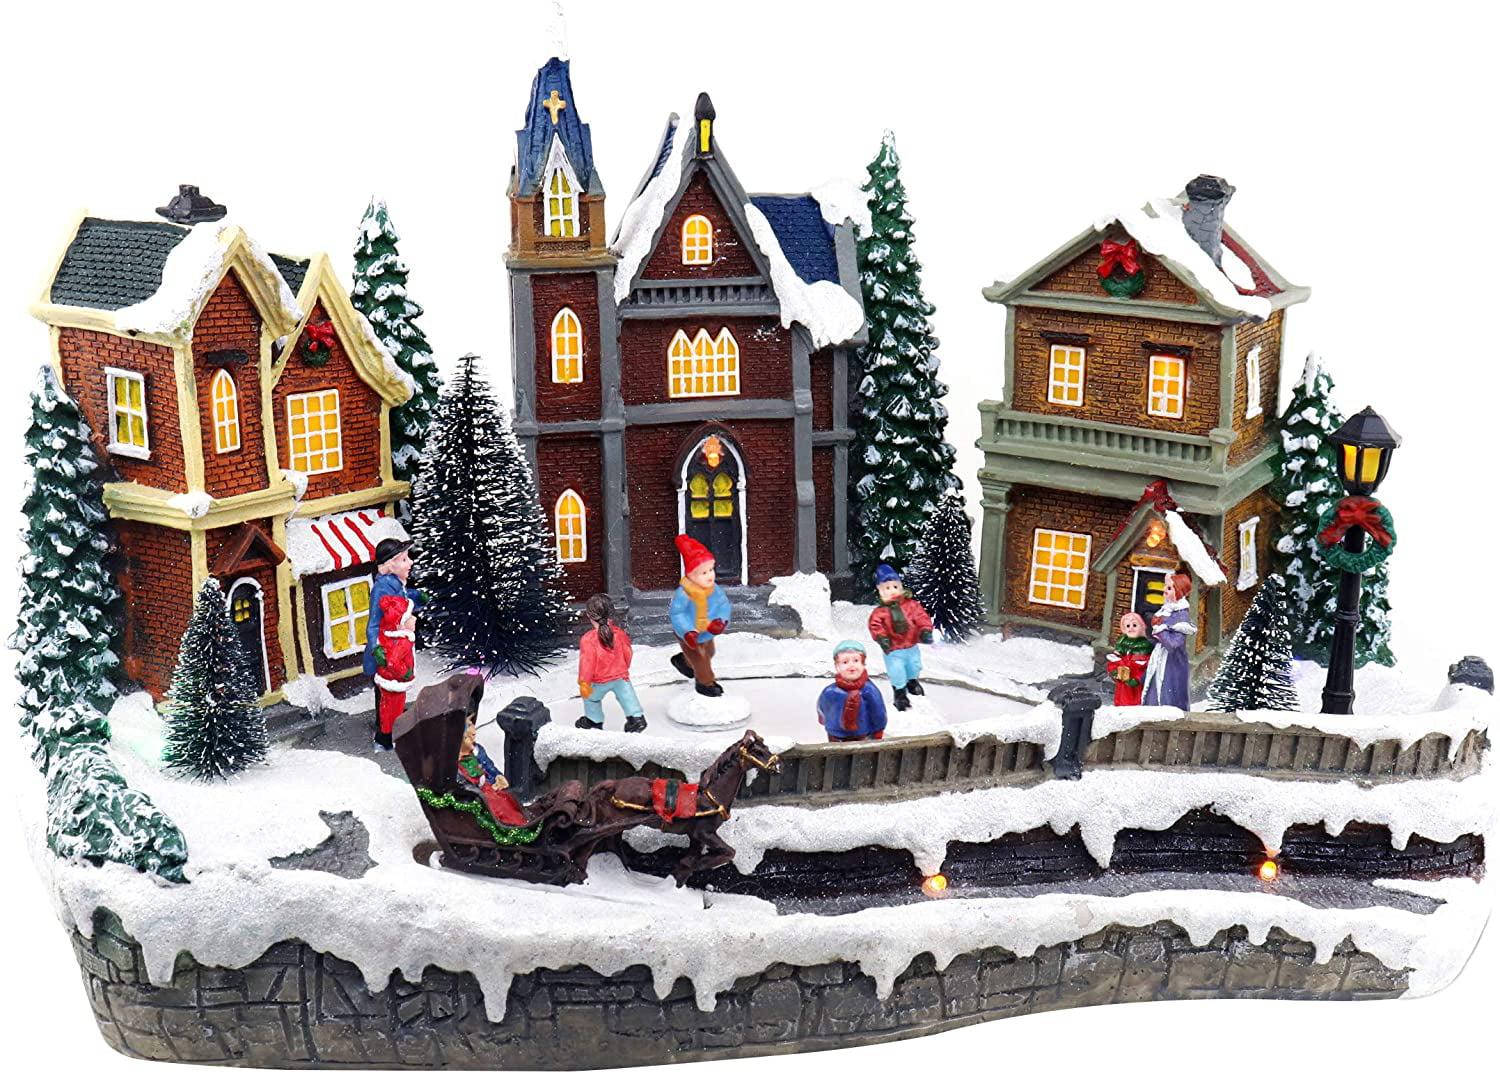 Christmas Village Merry Go Round Carousel Pre-lit Animated Musical Snow Village Perfect addition to your Christmas Decorations & Christmas Village Displays 